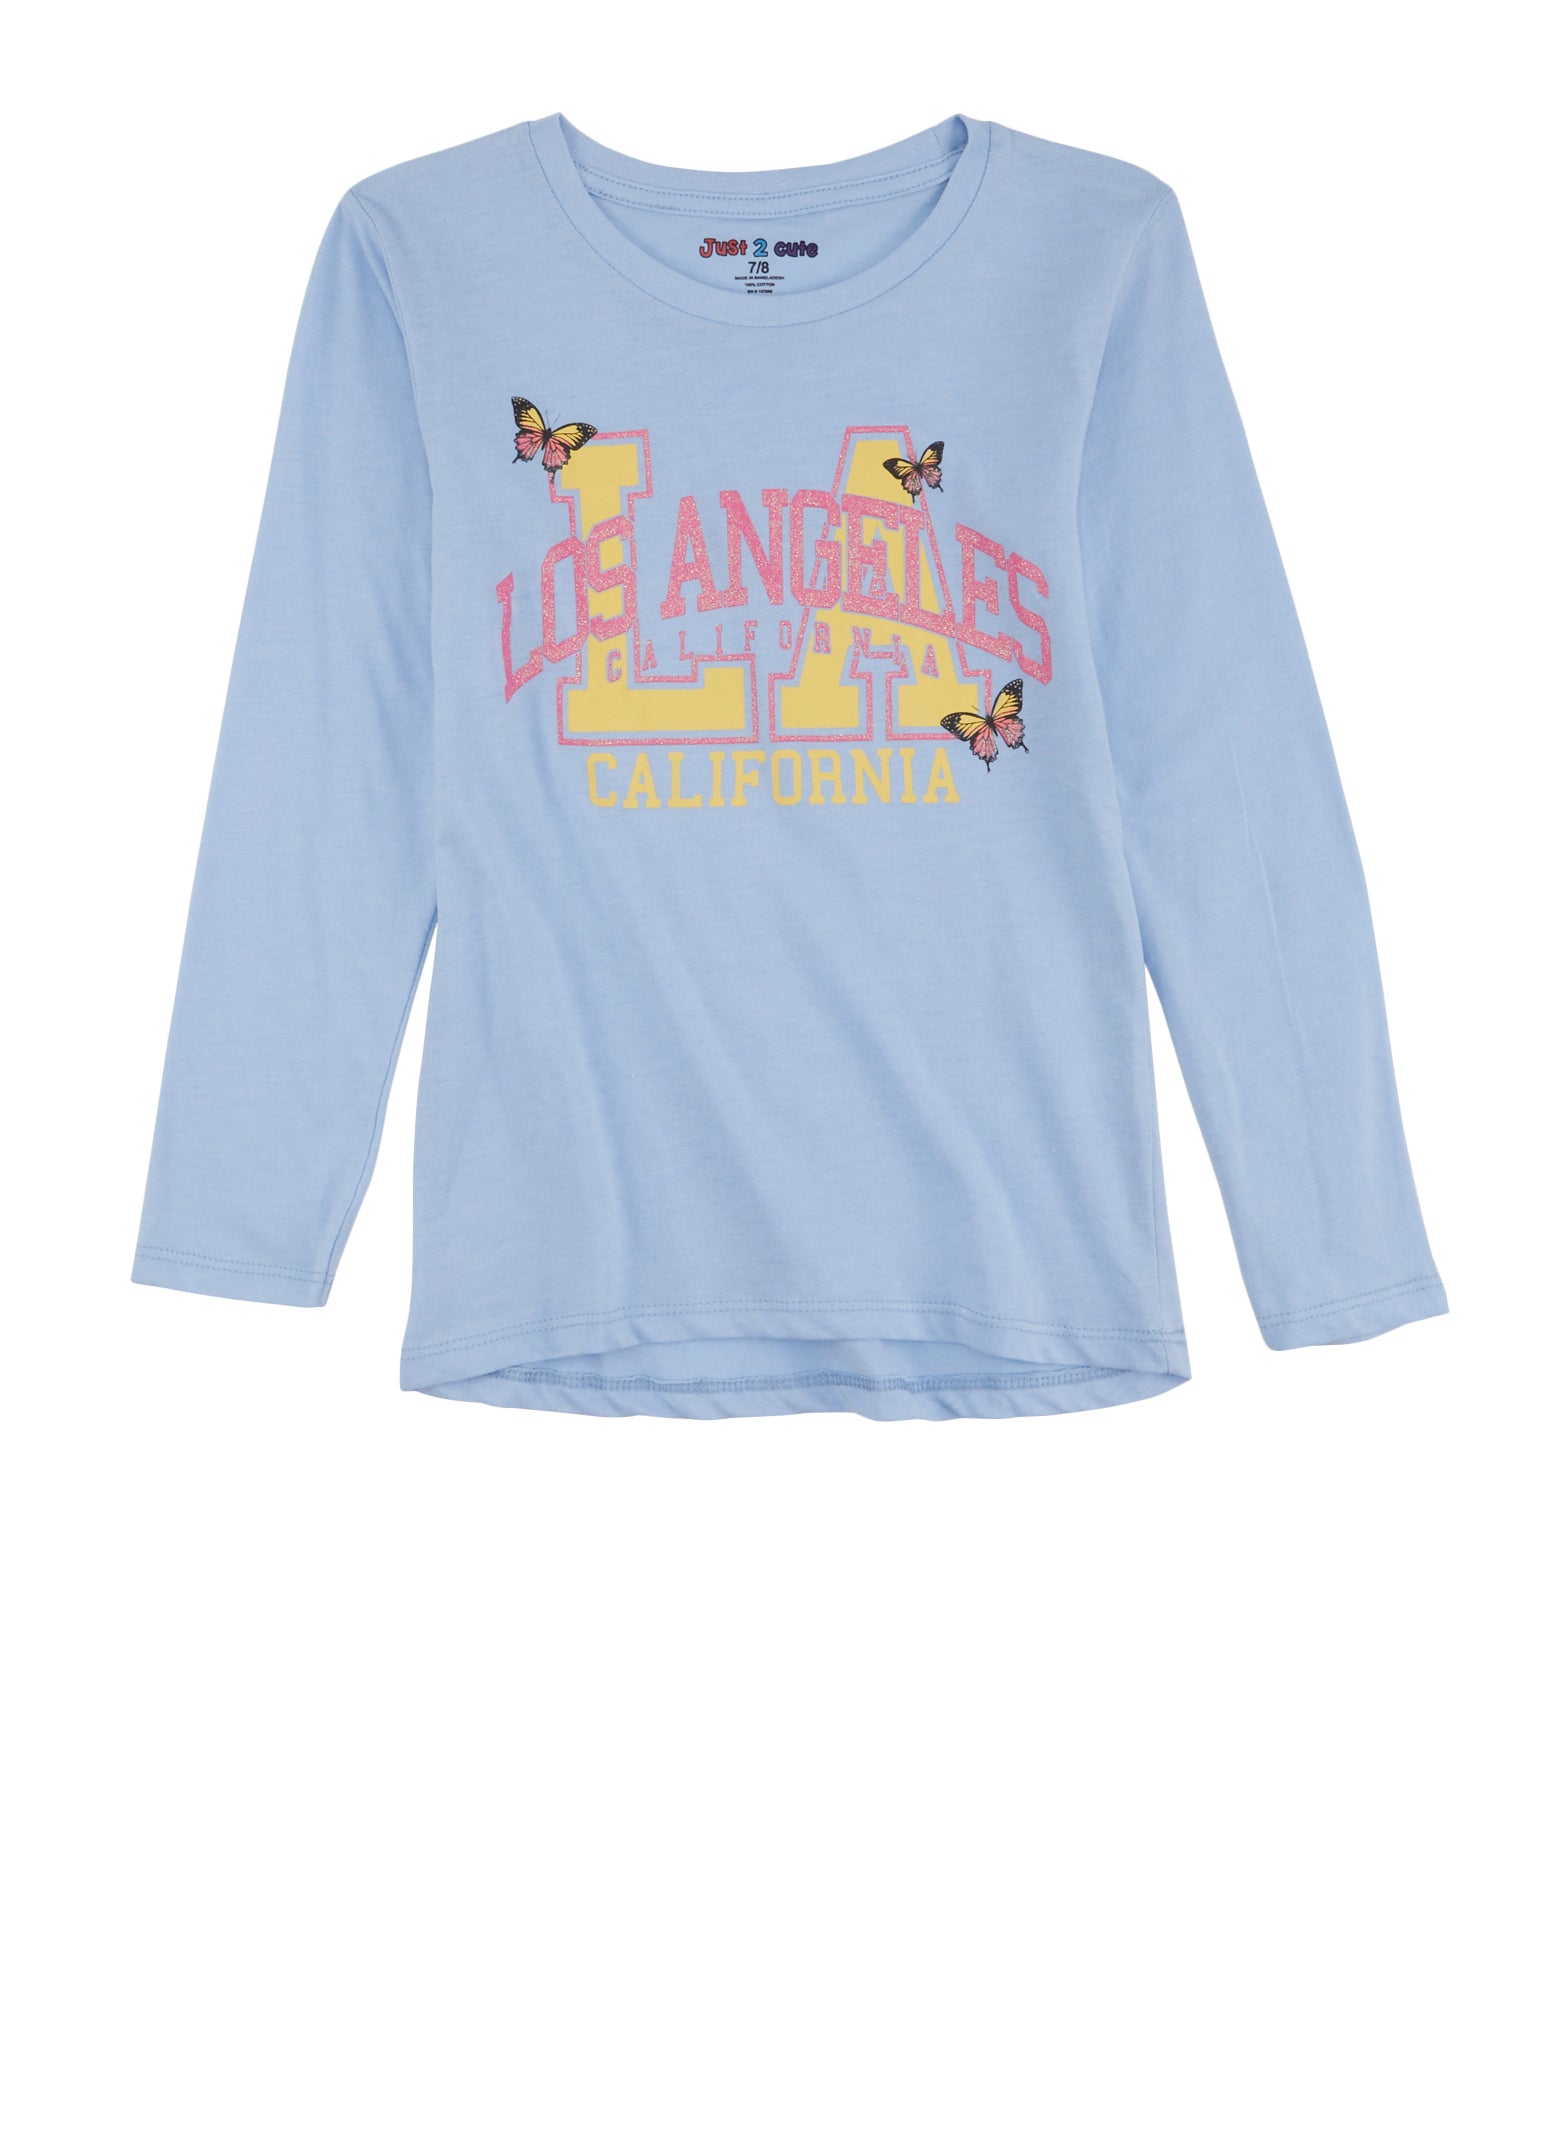 Girls Los Angeles Butterfly Glitter Graphic Tee, Blue, Size 7-8